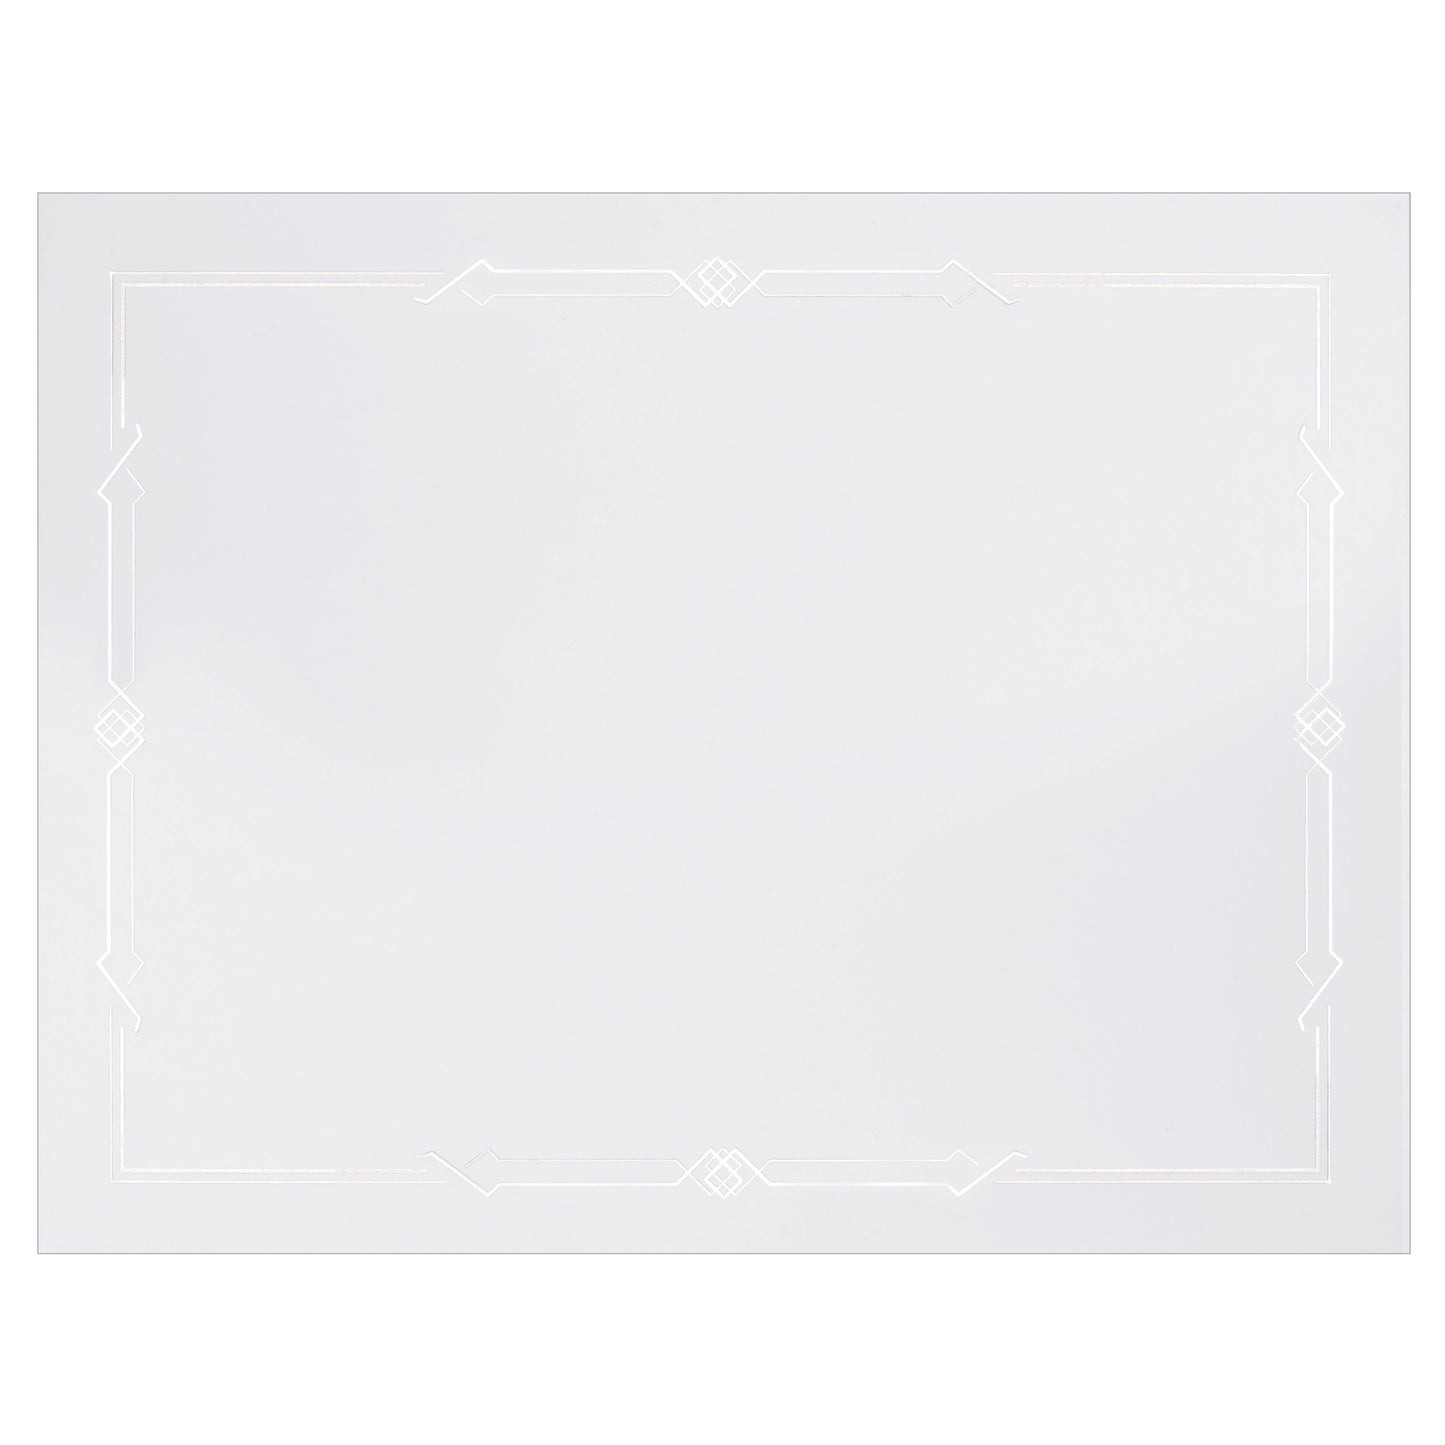 St. James® Premium Weight Certificates, Gatsby Design, Silver Foil, White, 65 lb, 8.5 x 11", Pack of 15